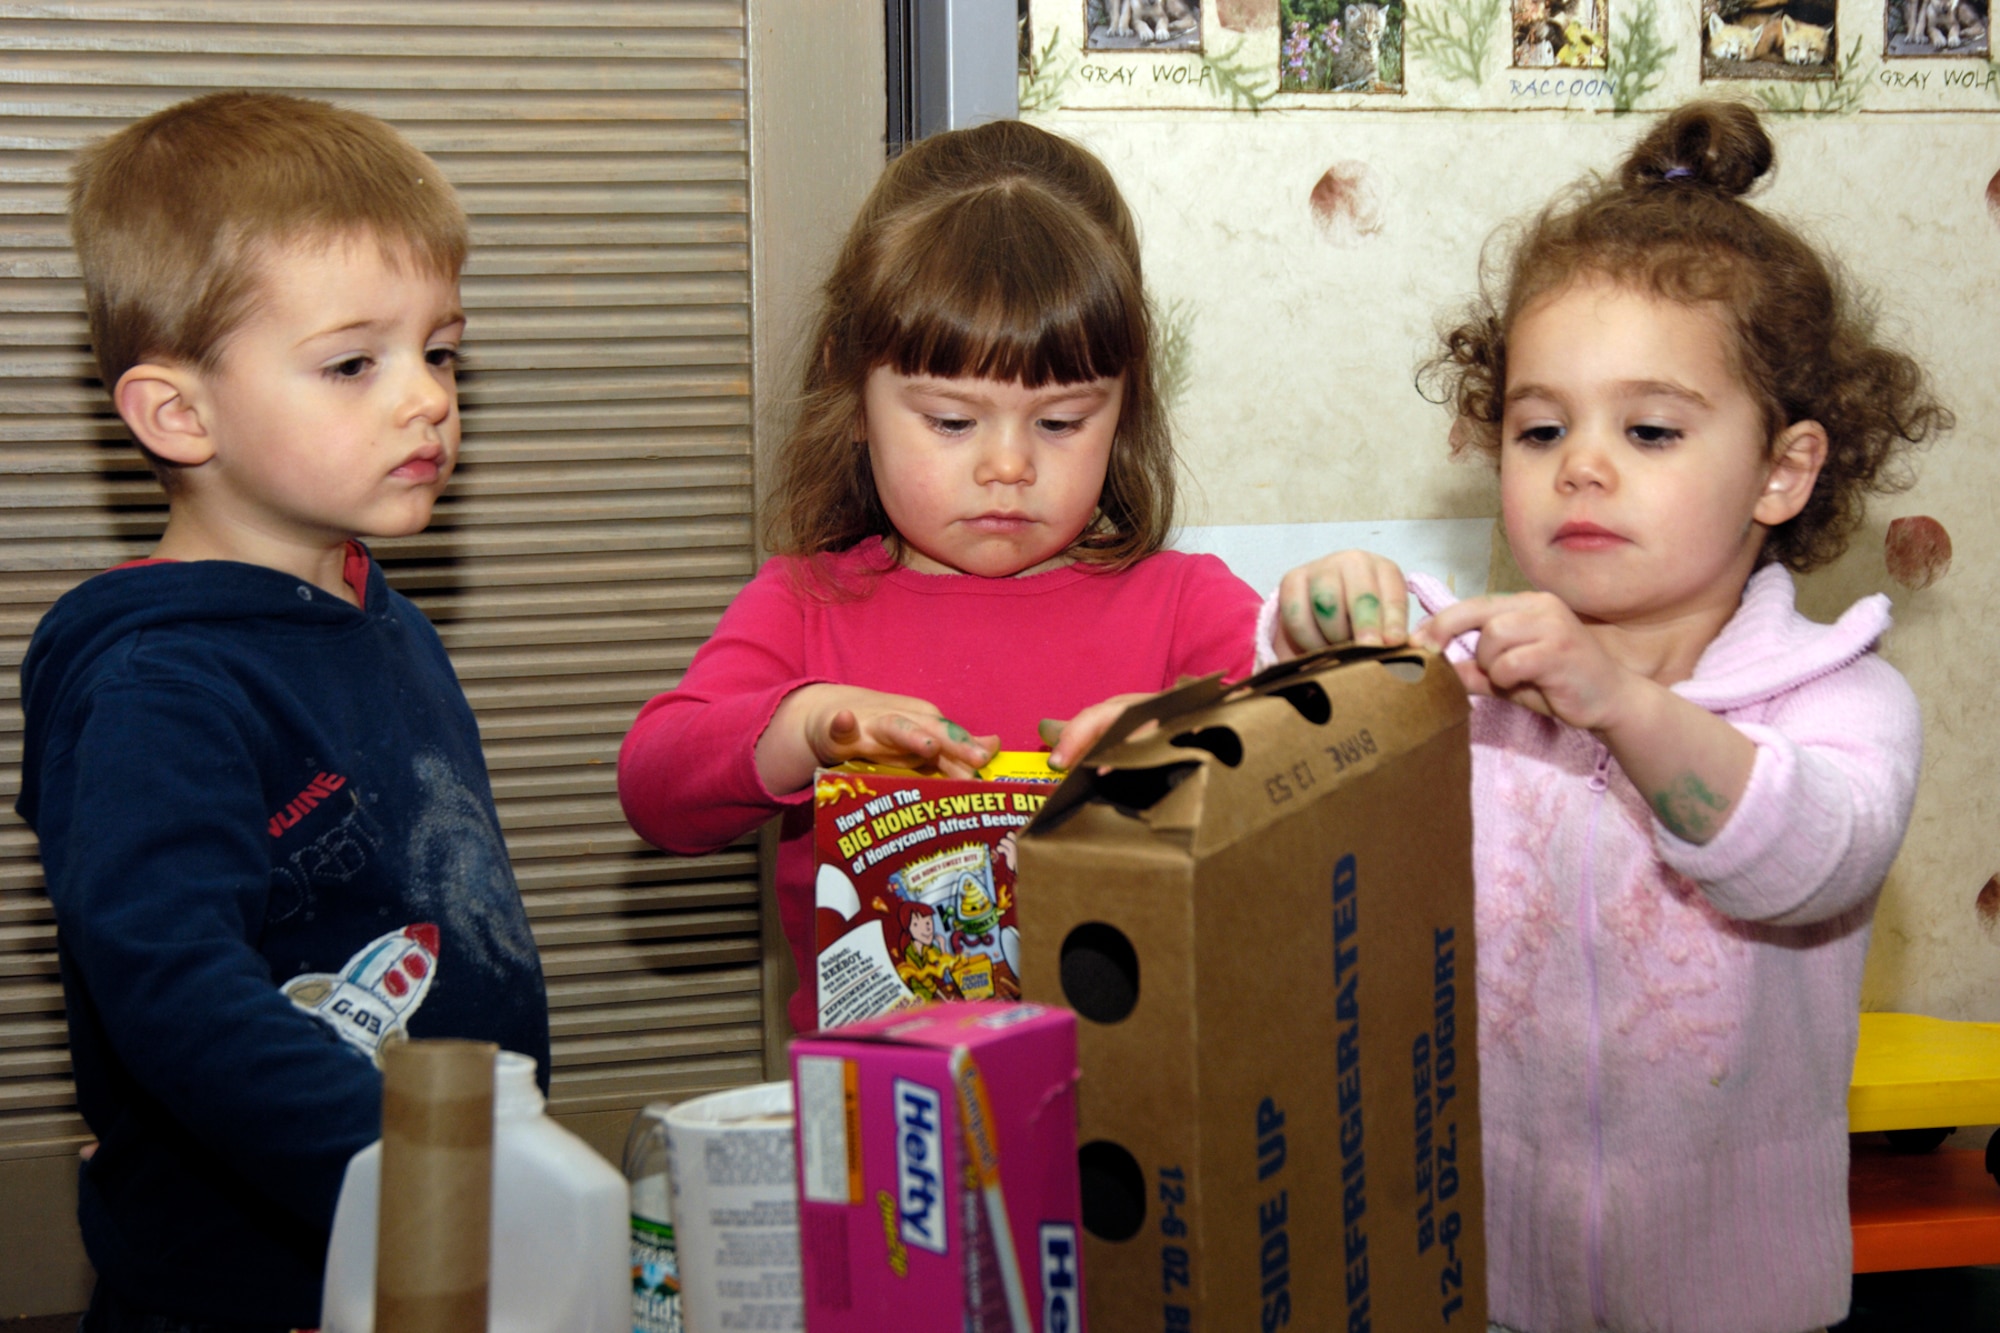 HANSCOM AIR FORCE BASE, Mass. – Children from Room 4 at the Child Development Center learn that recycling is not only good for the environment but a lot of fun too as they create a sculpture from recycled items. Pictured from left to right are CJ Langley, Hannah Quinton and Carleigh Franzoni. (U.S. Air Force photo by Linda LaBonte Britt) 